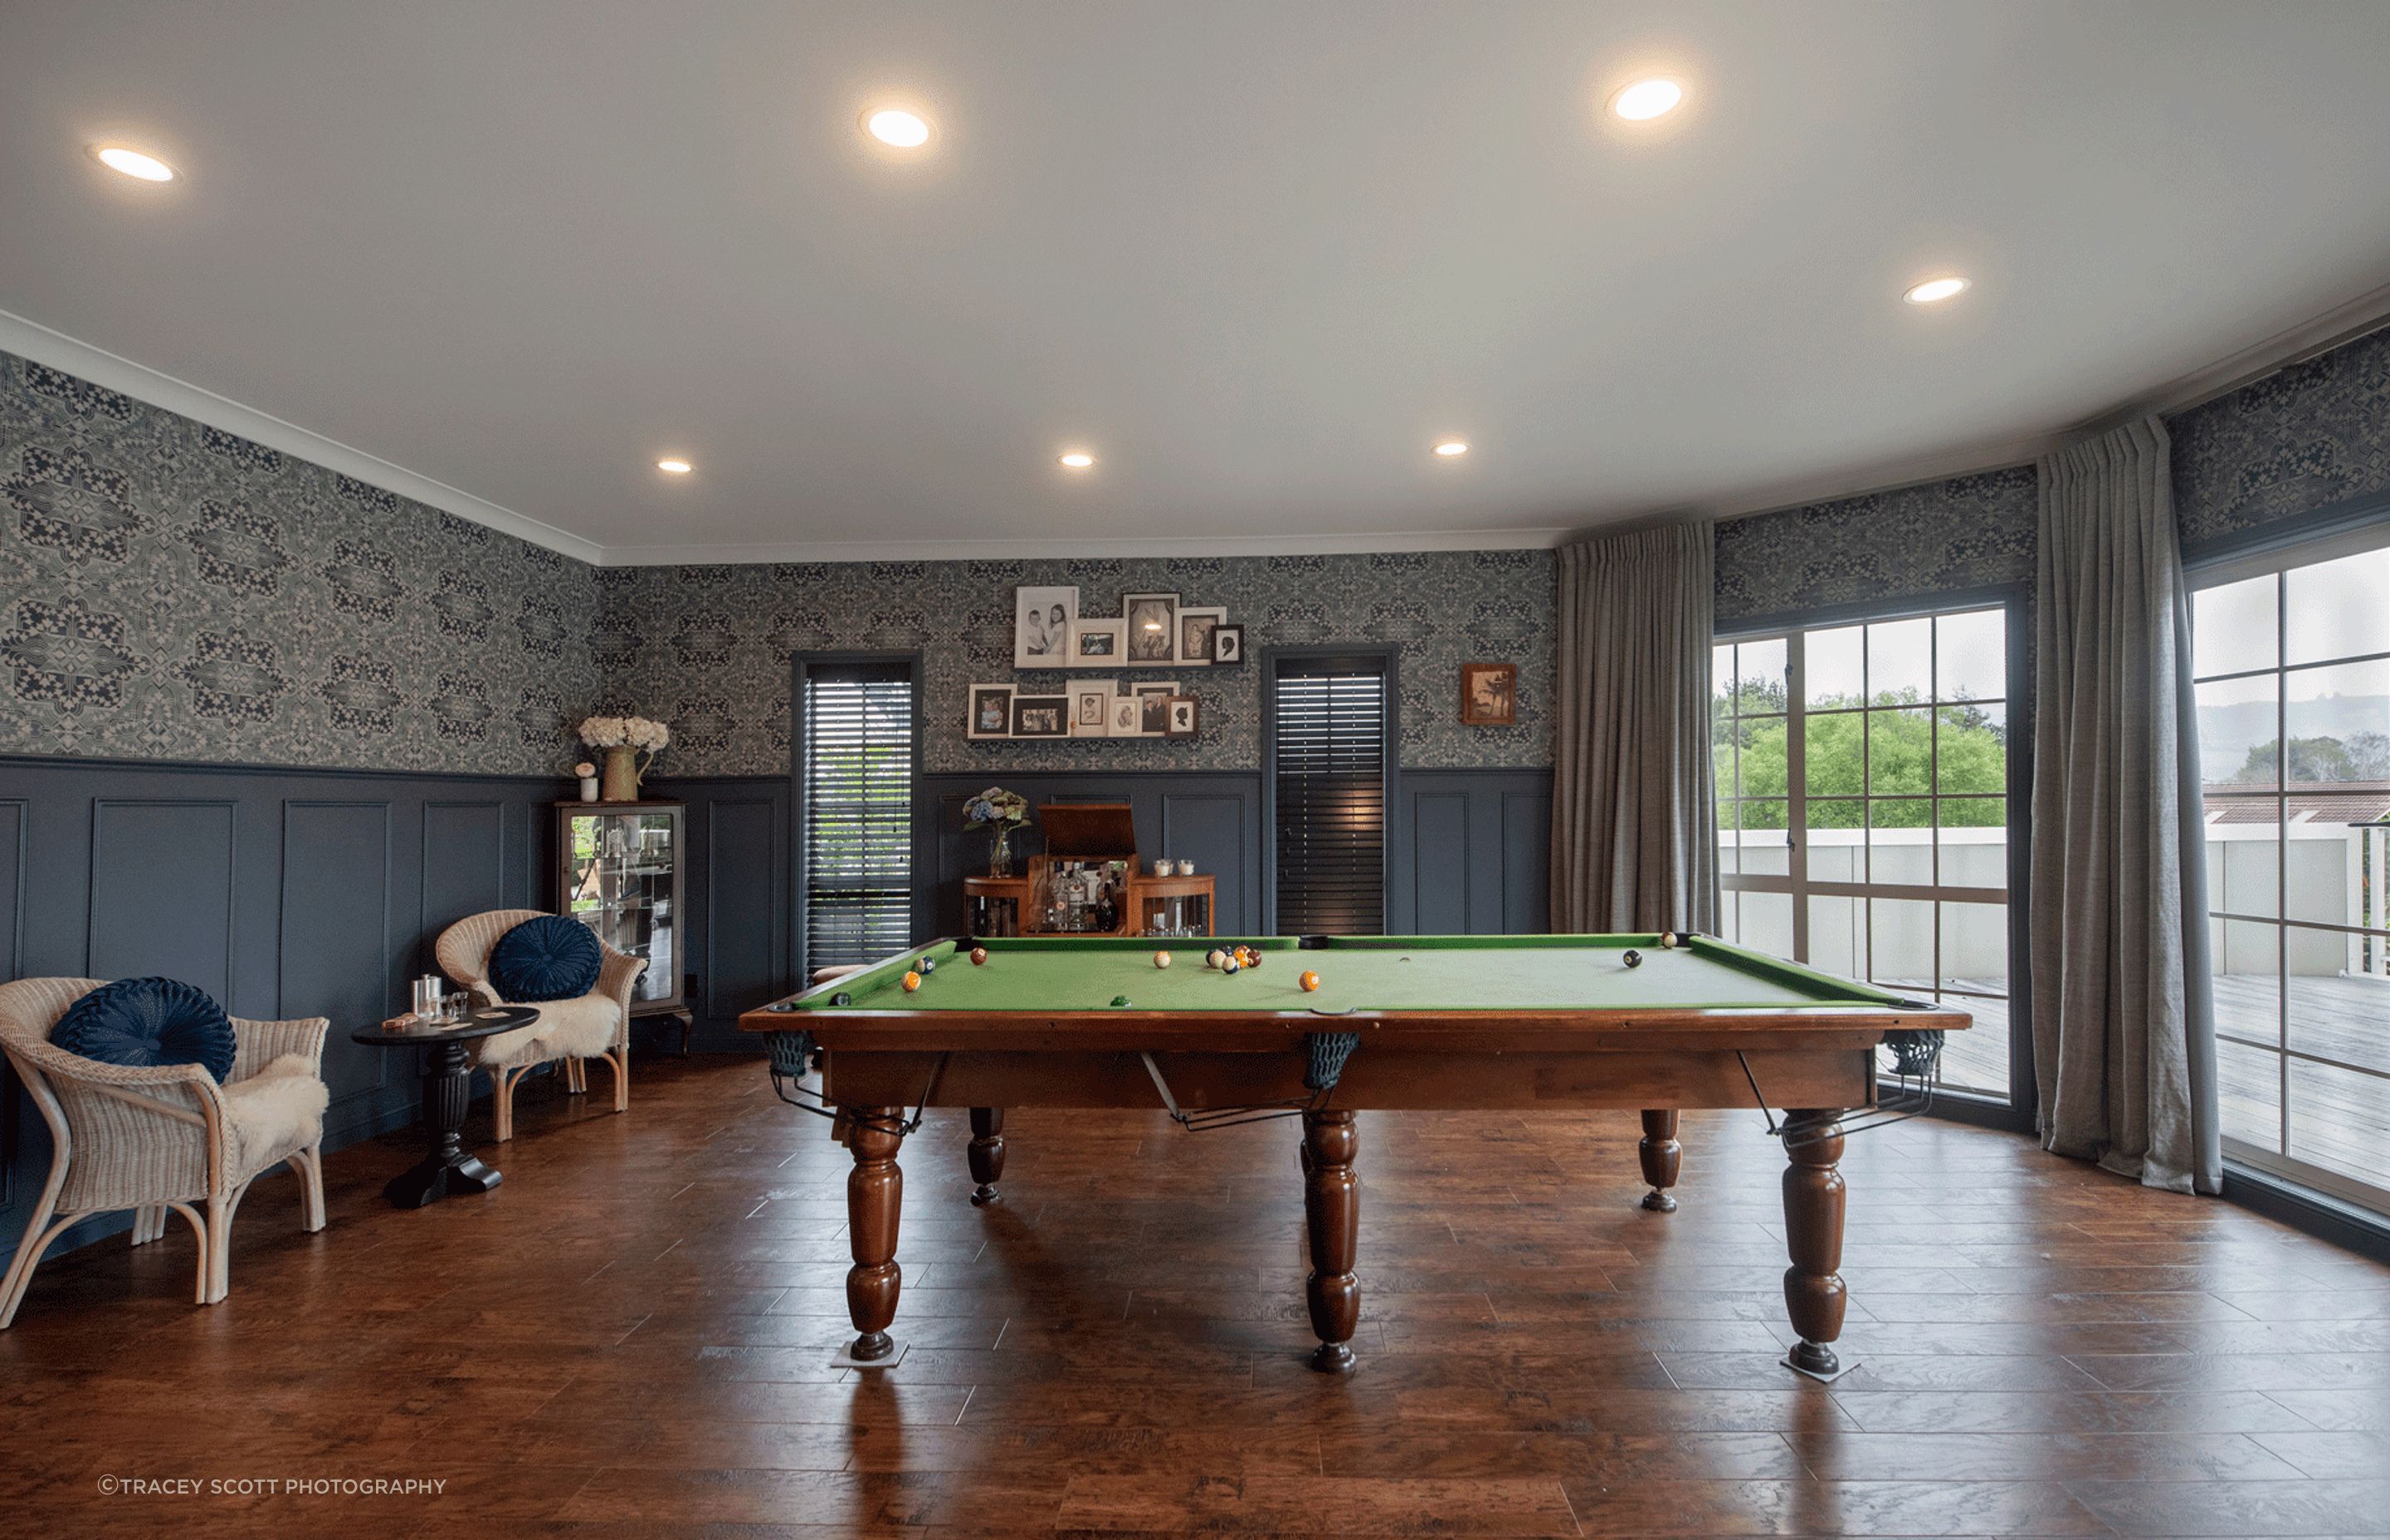 Create memories with friends and family in this games room